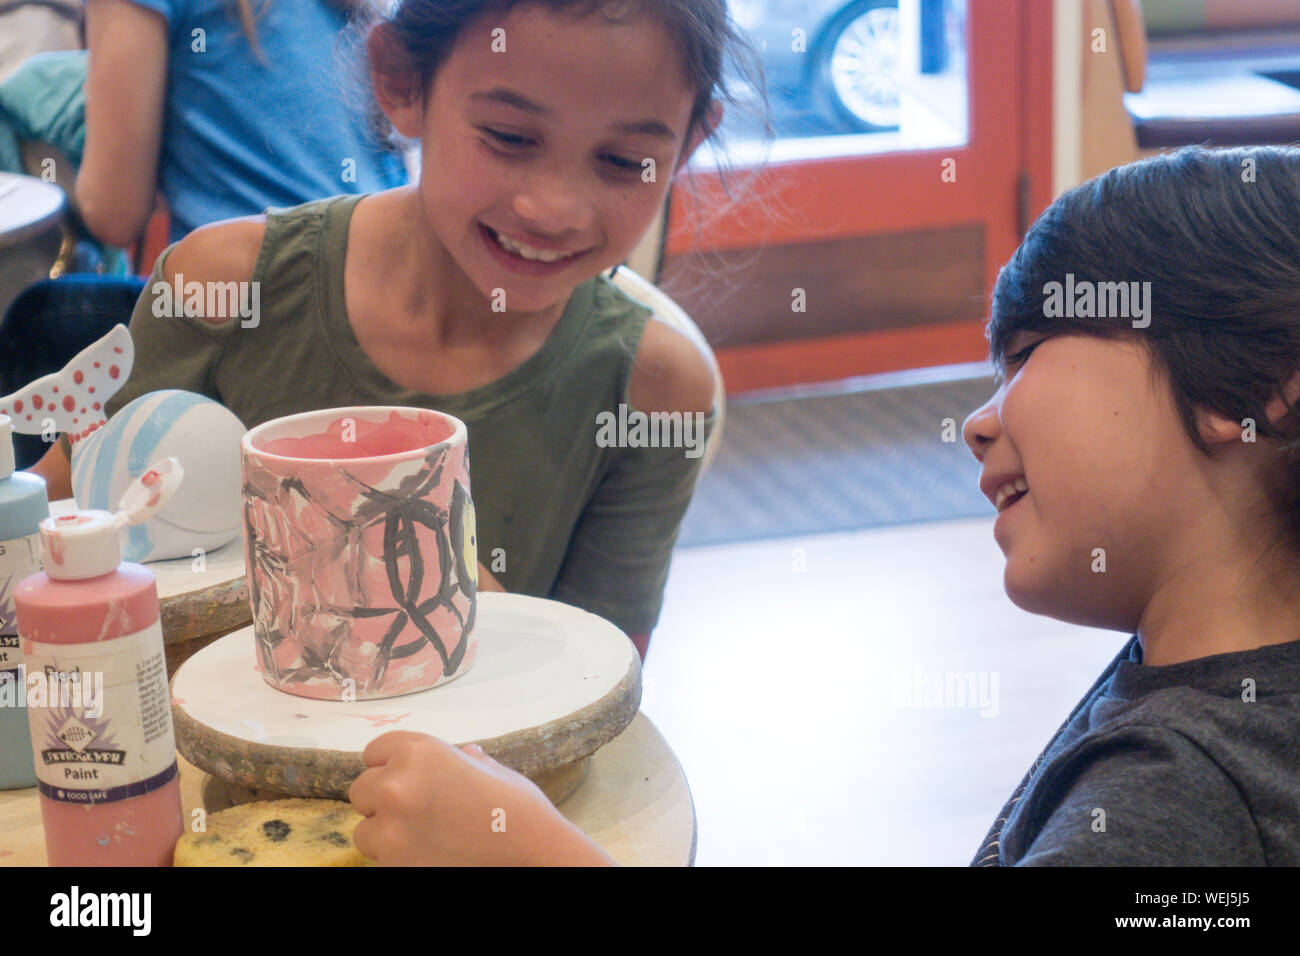 Young brother and sister in pottery class with painted mug, San Jose, California Stock Photo